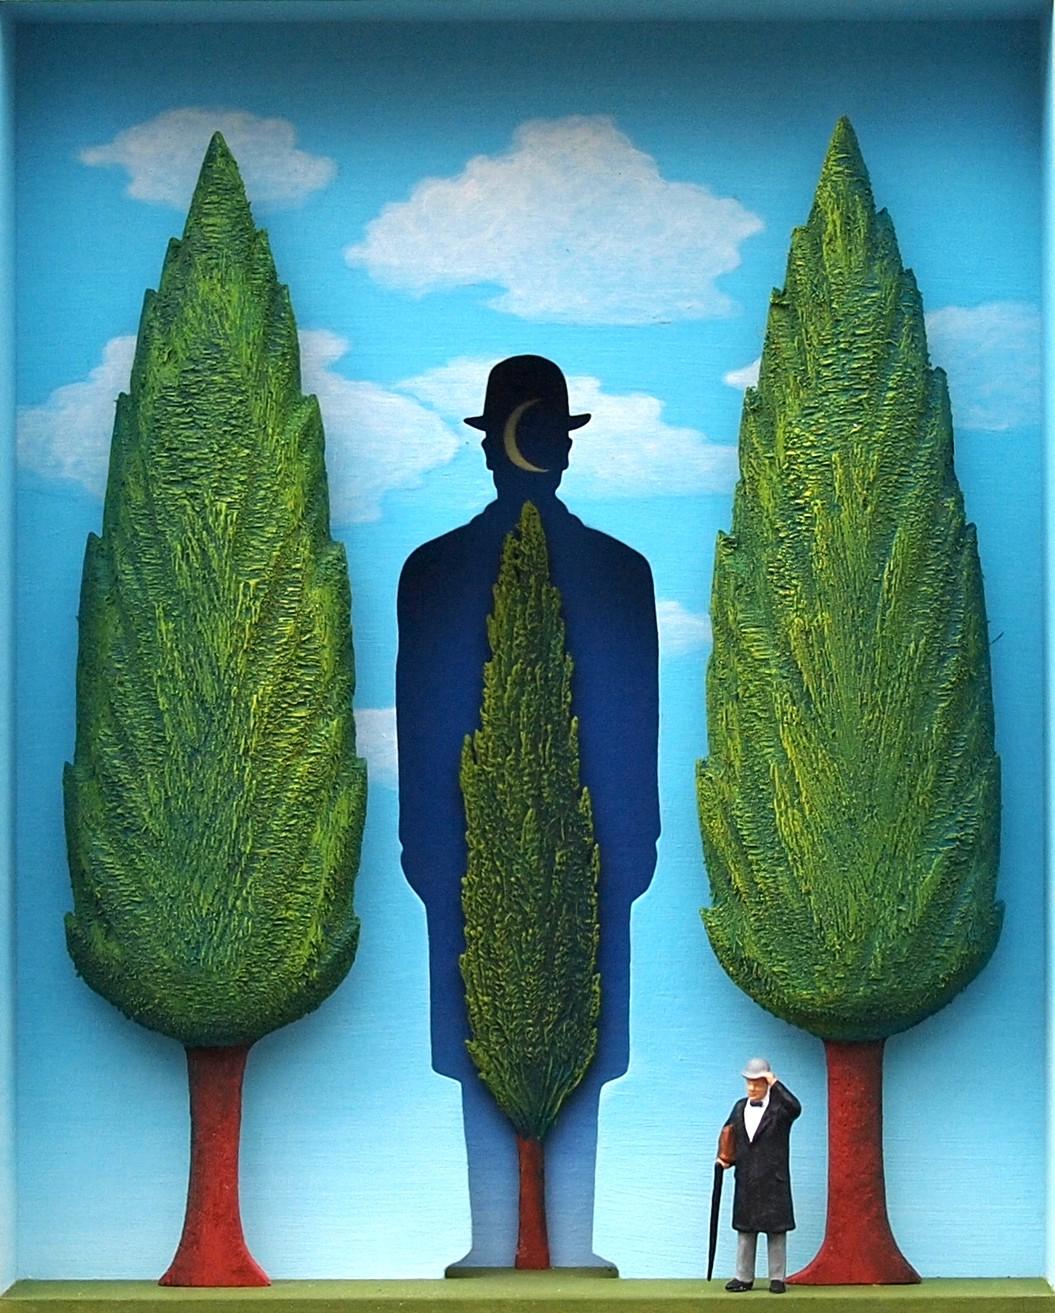 The Garden of Magritte - contemporary art work homage to Belgian surrealist  - Mixed Media Art by Volker Kuhn